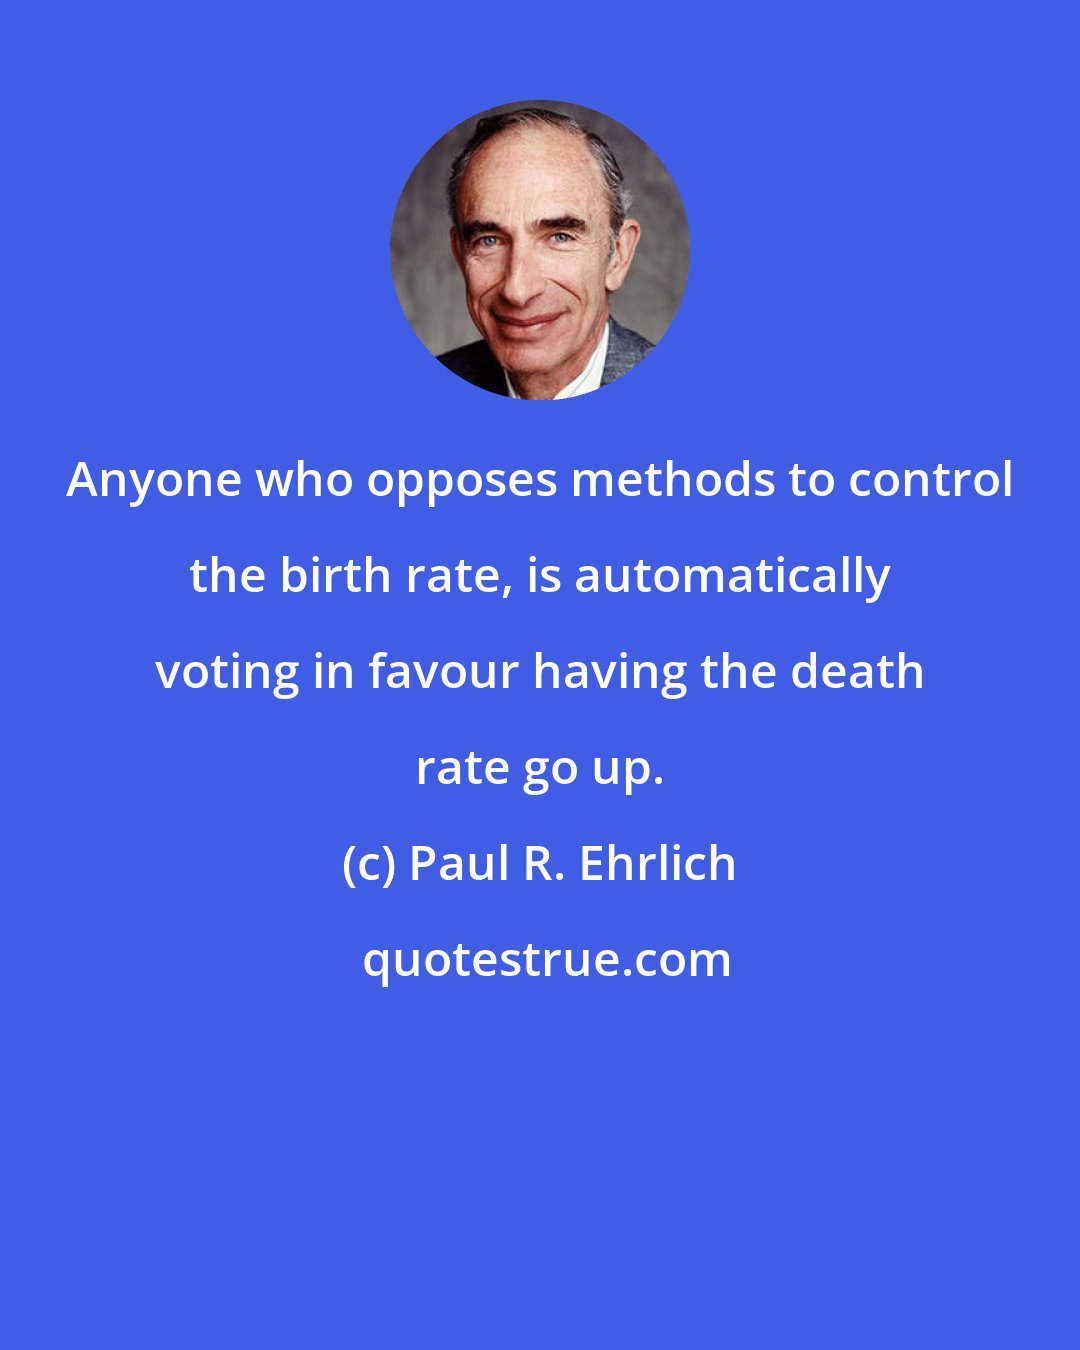 Paul R. Ehrlich: Anyone who opposes methods to control the birth rate, is automatically voting in favour having the death rate go up.